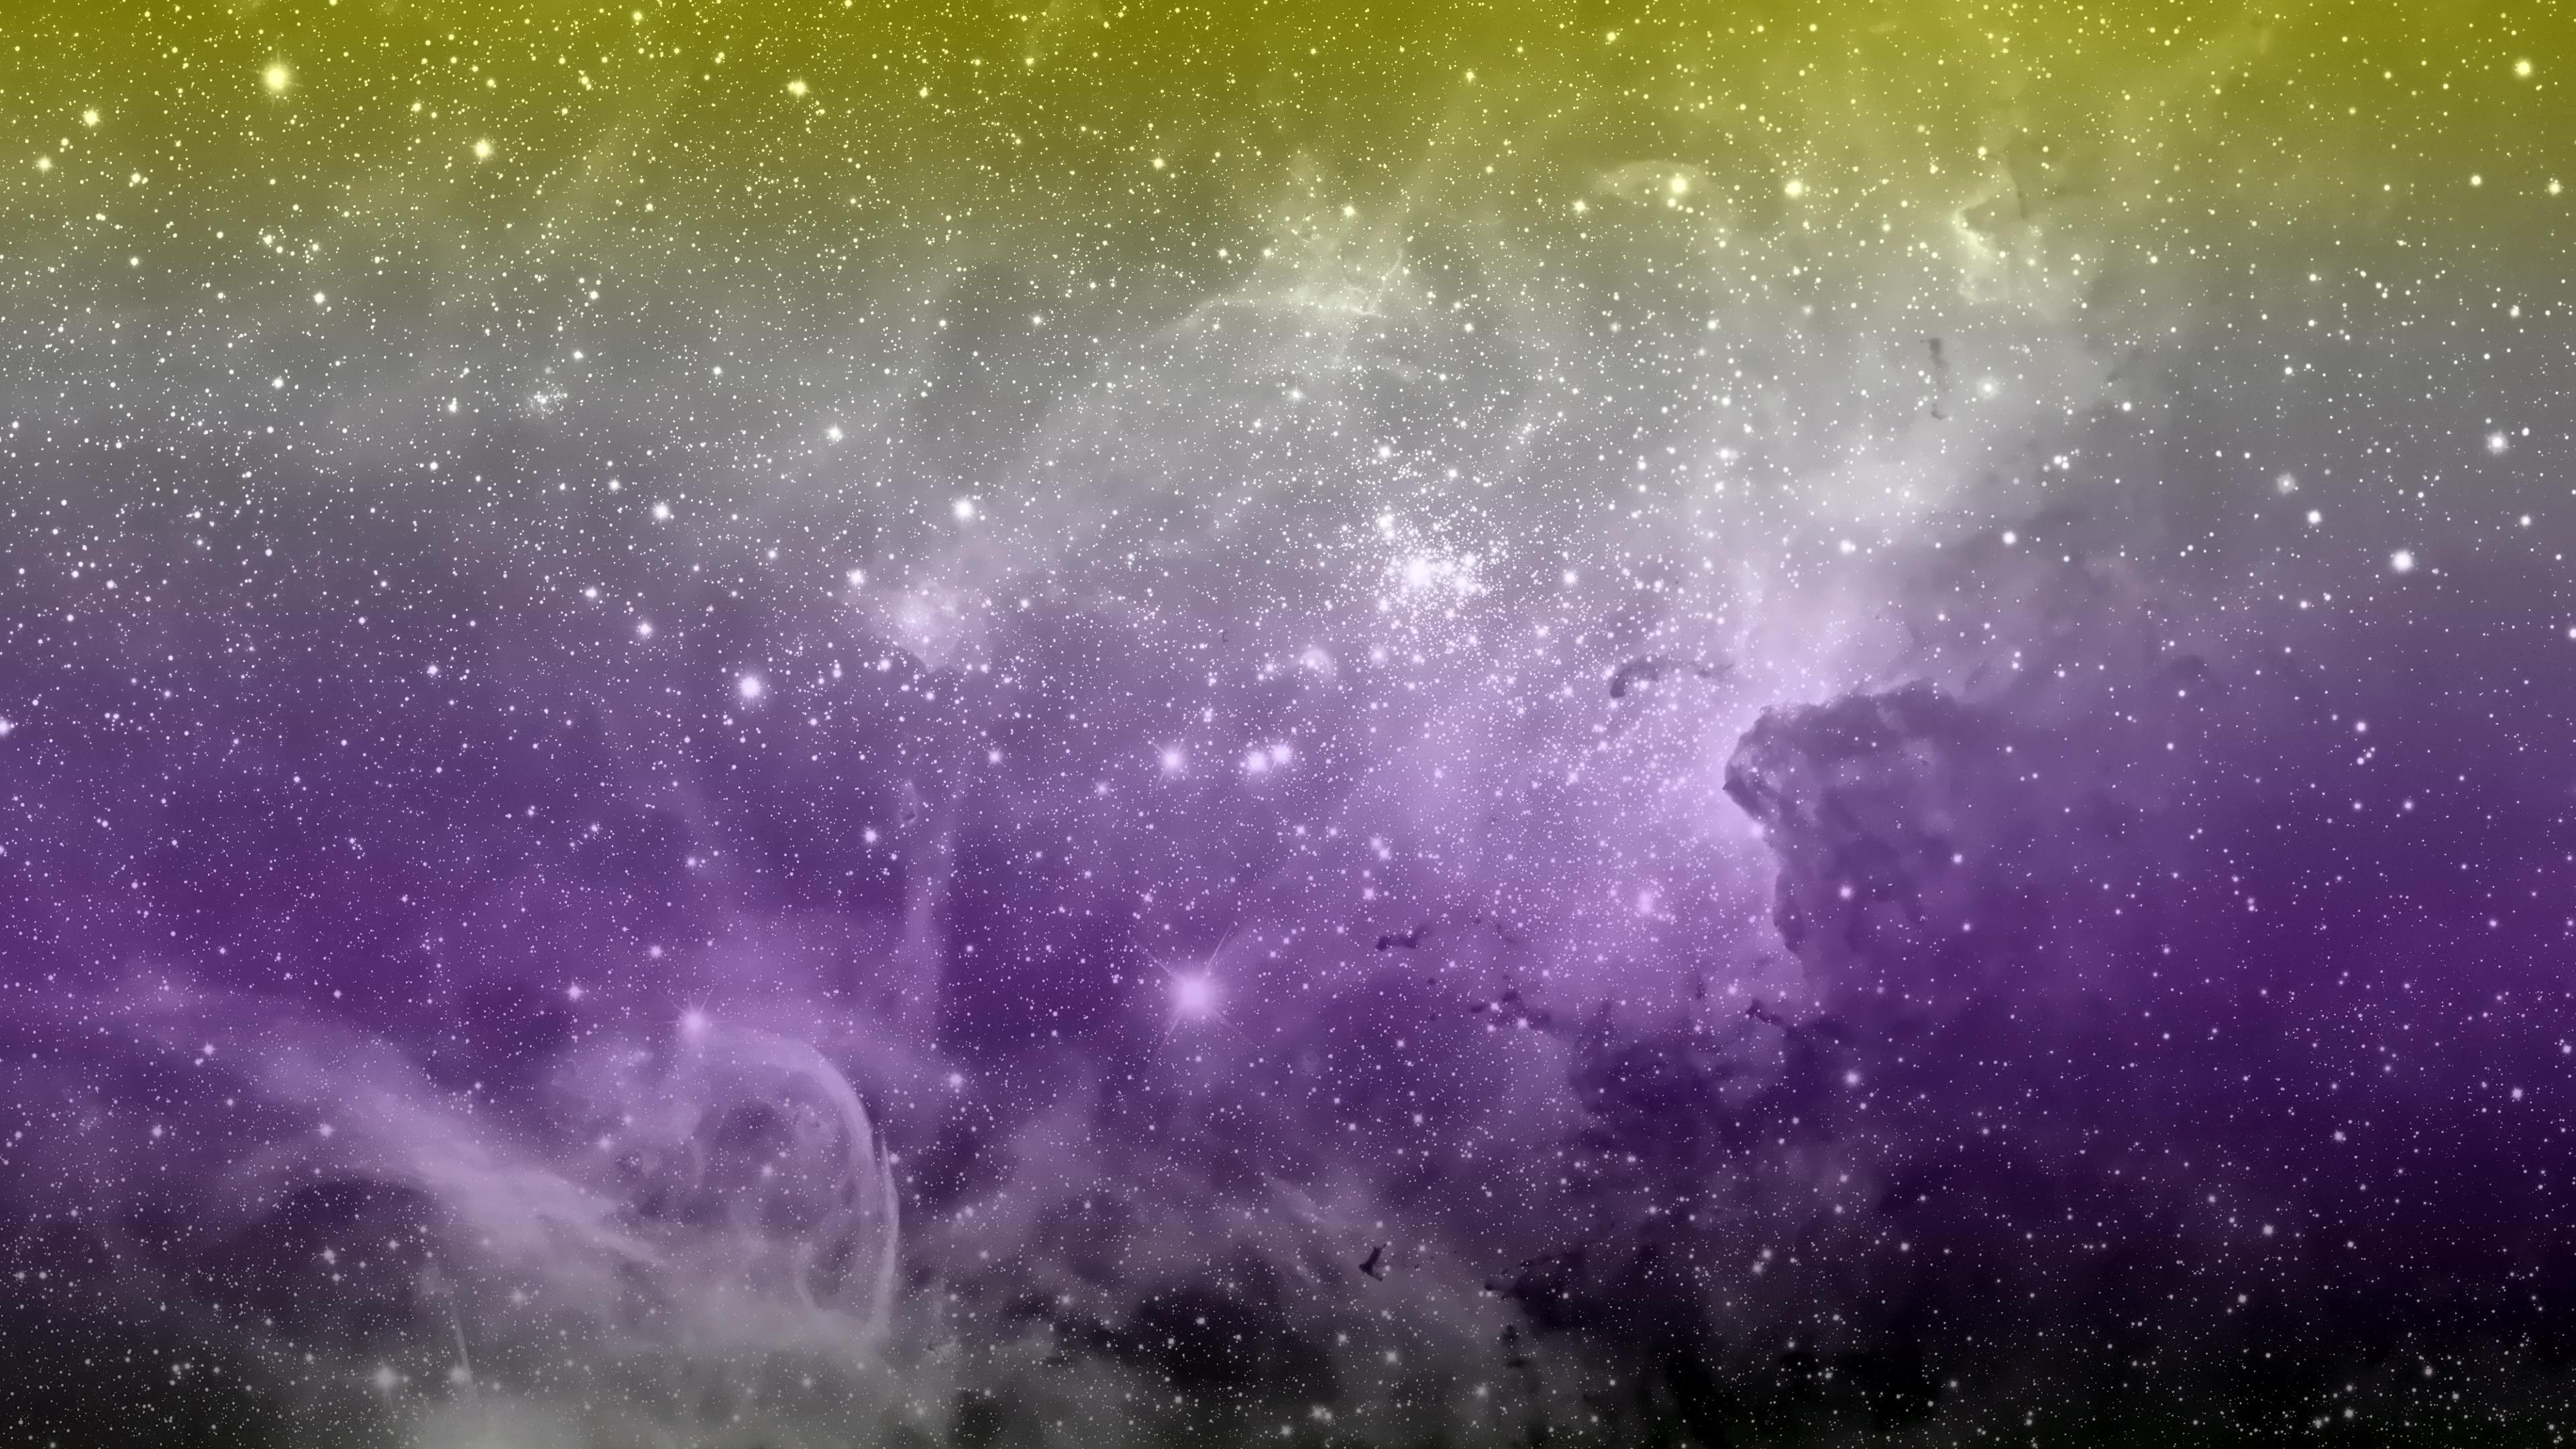 A 4k, Non Binary Space Wallpaper I Made! Feel Free To Use. :)